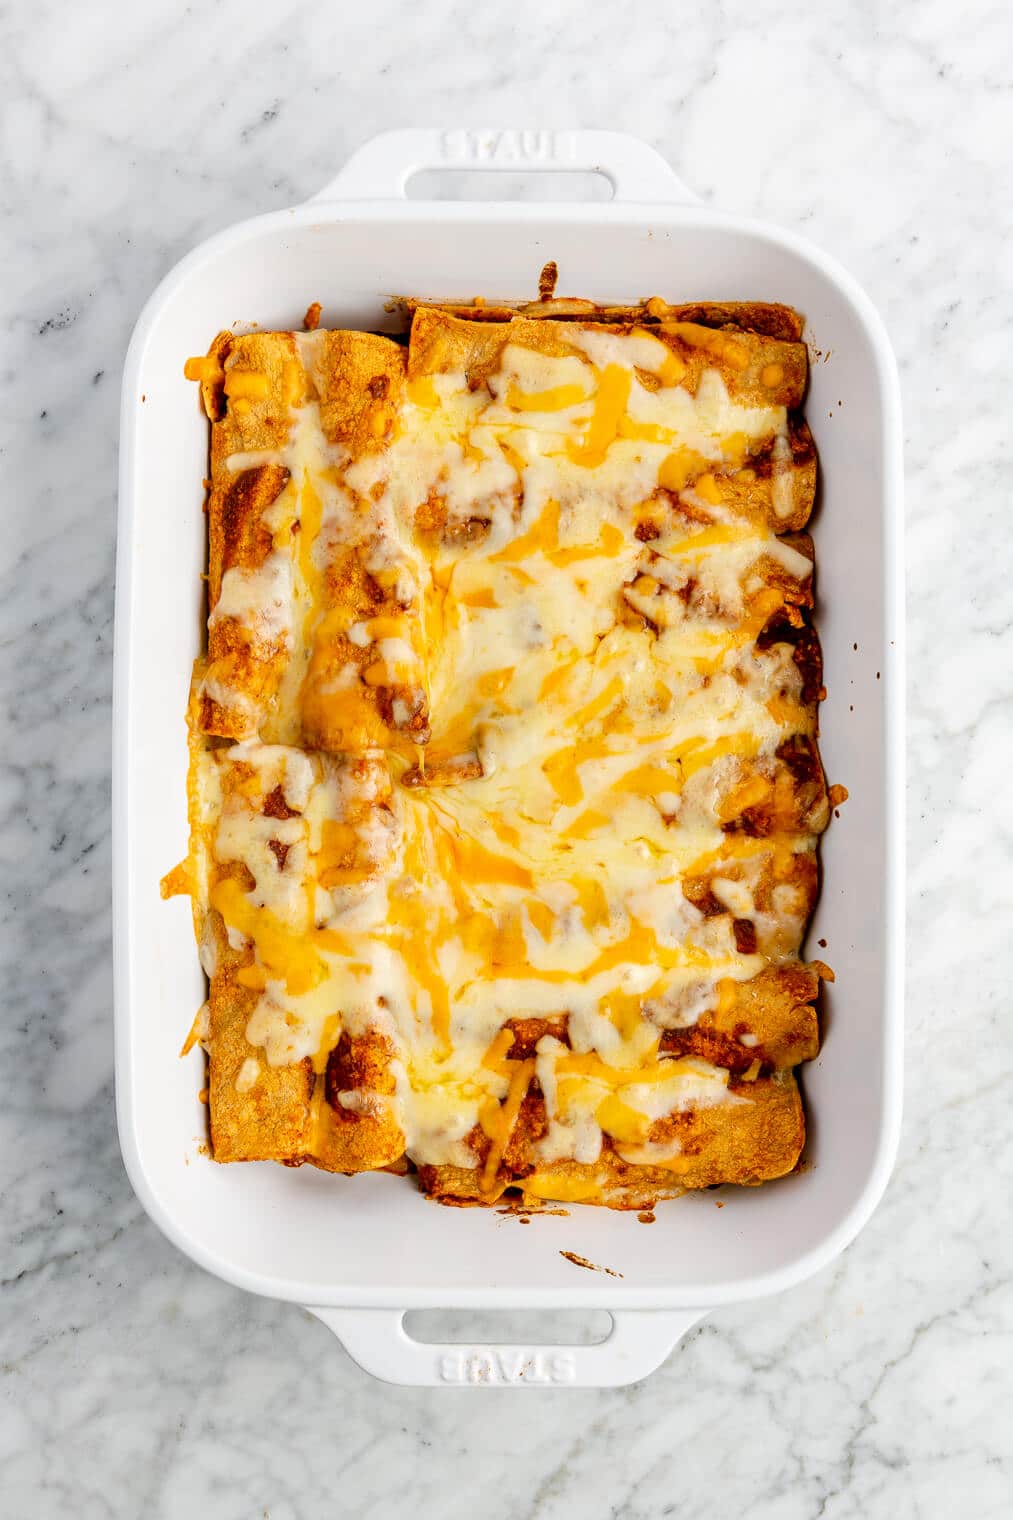 12 baked enchiladas topped with cheese in a casserole dish.